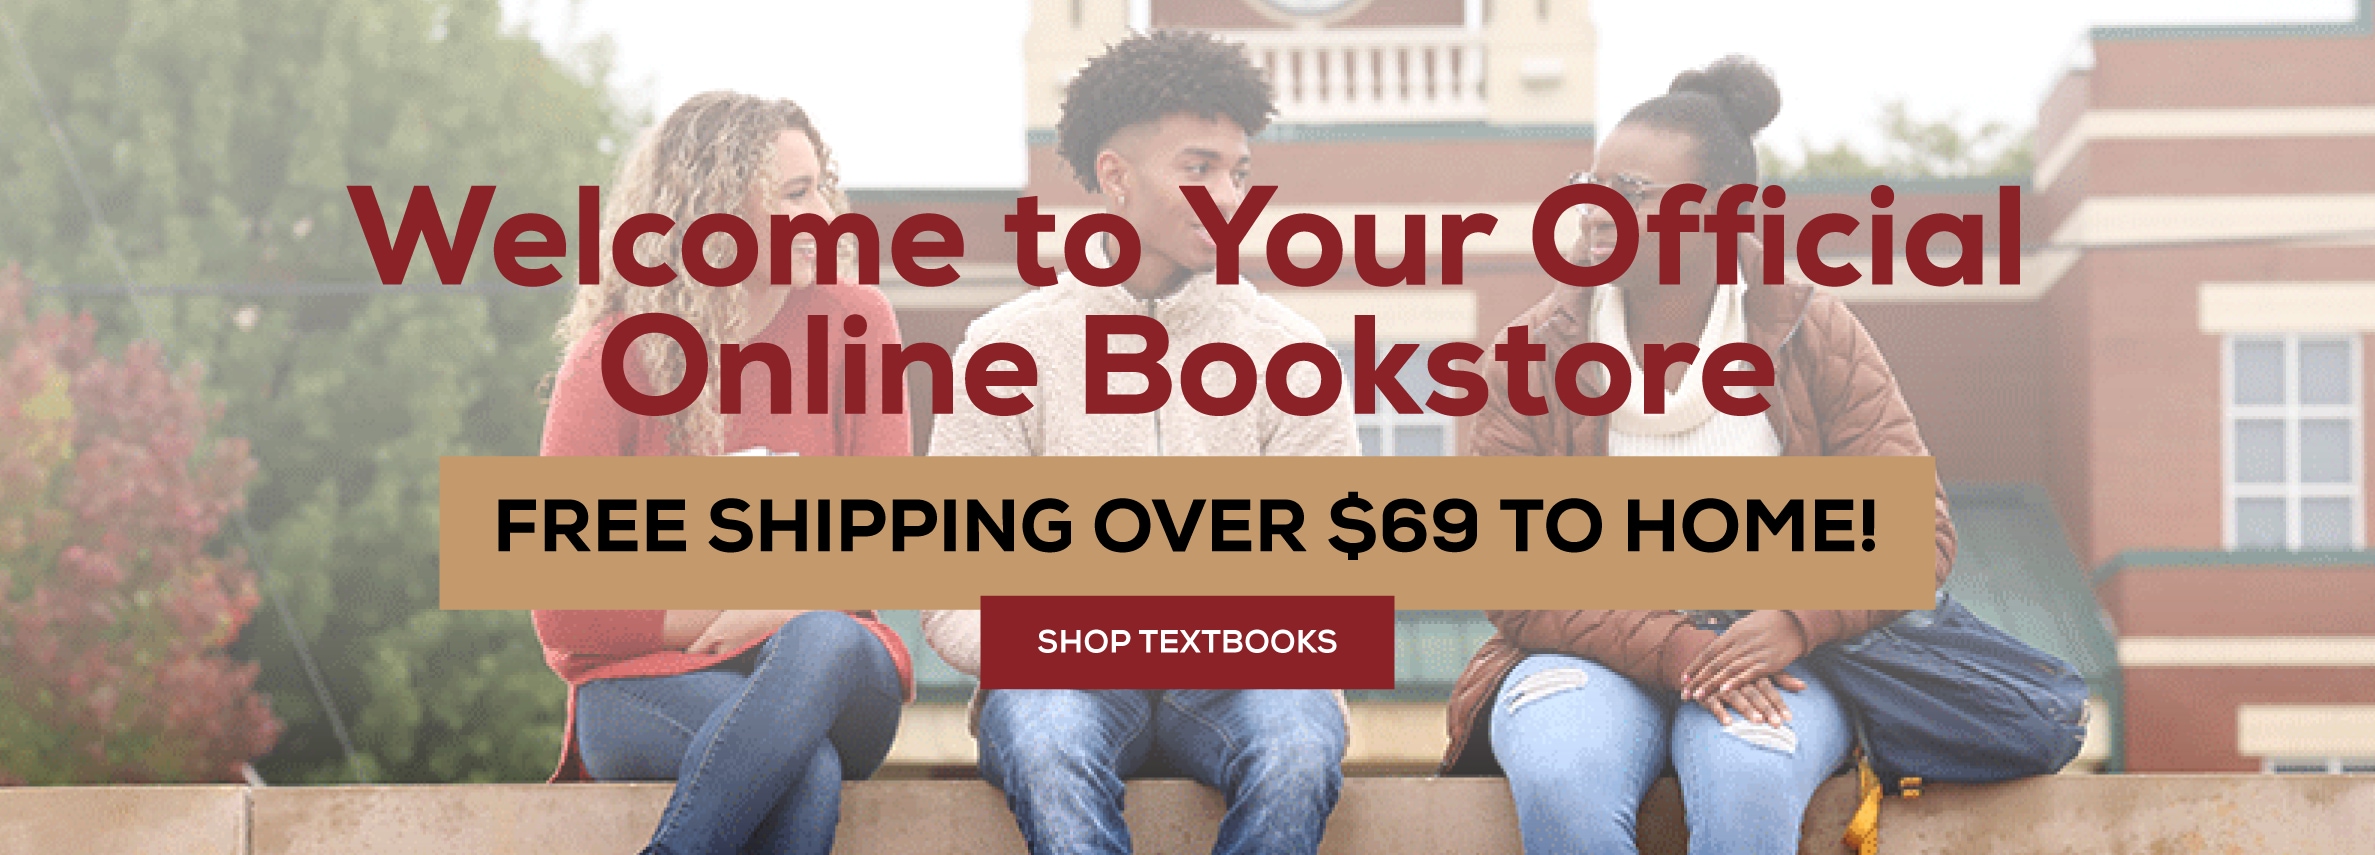 Welcome to Your Official Online Bookstore